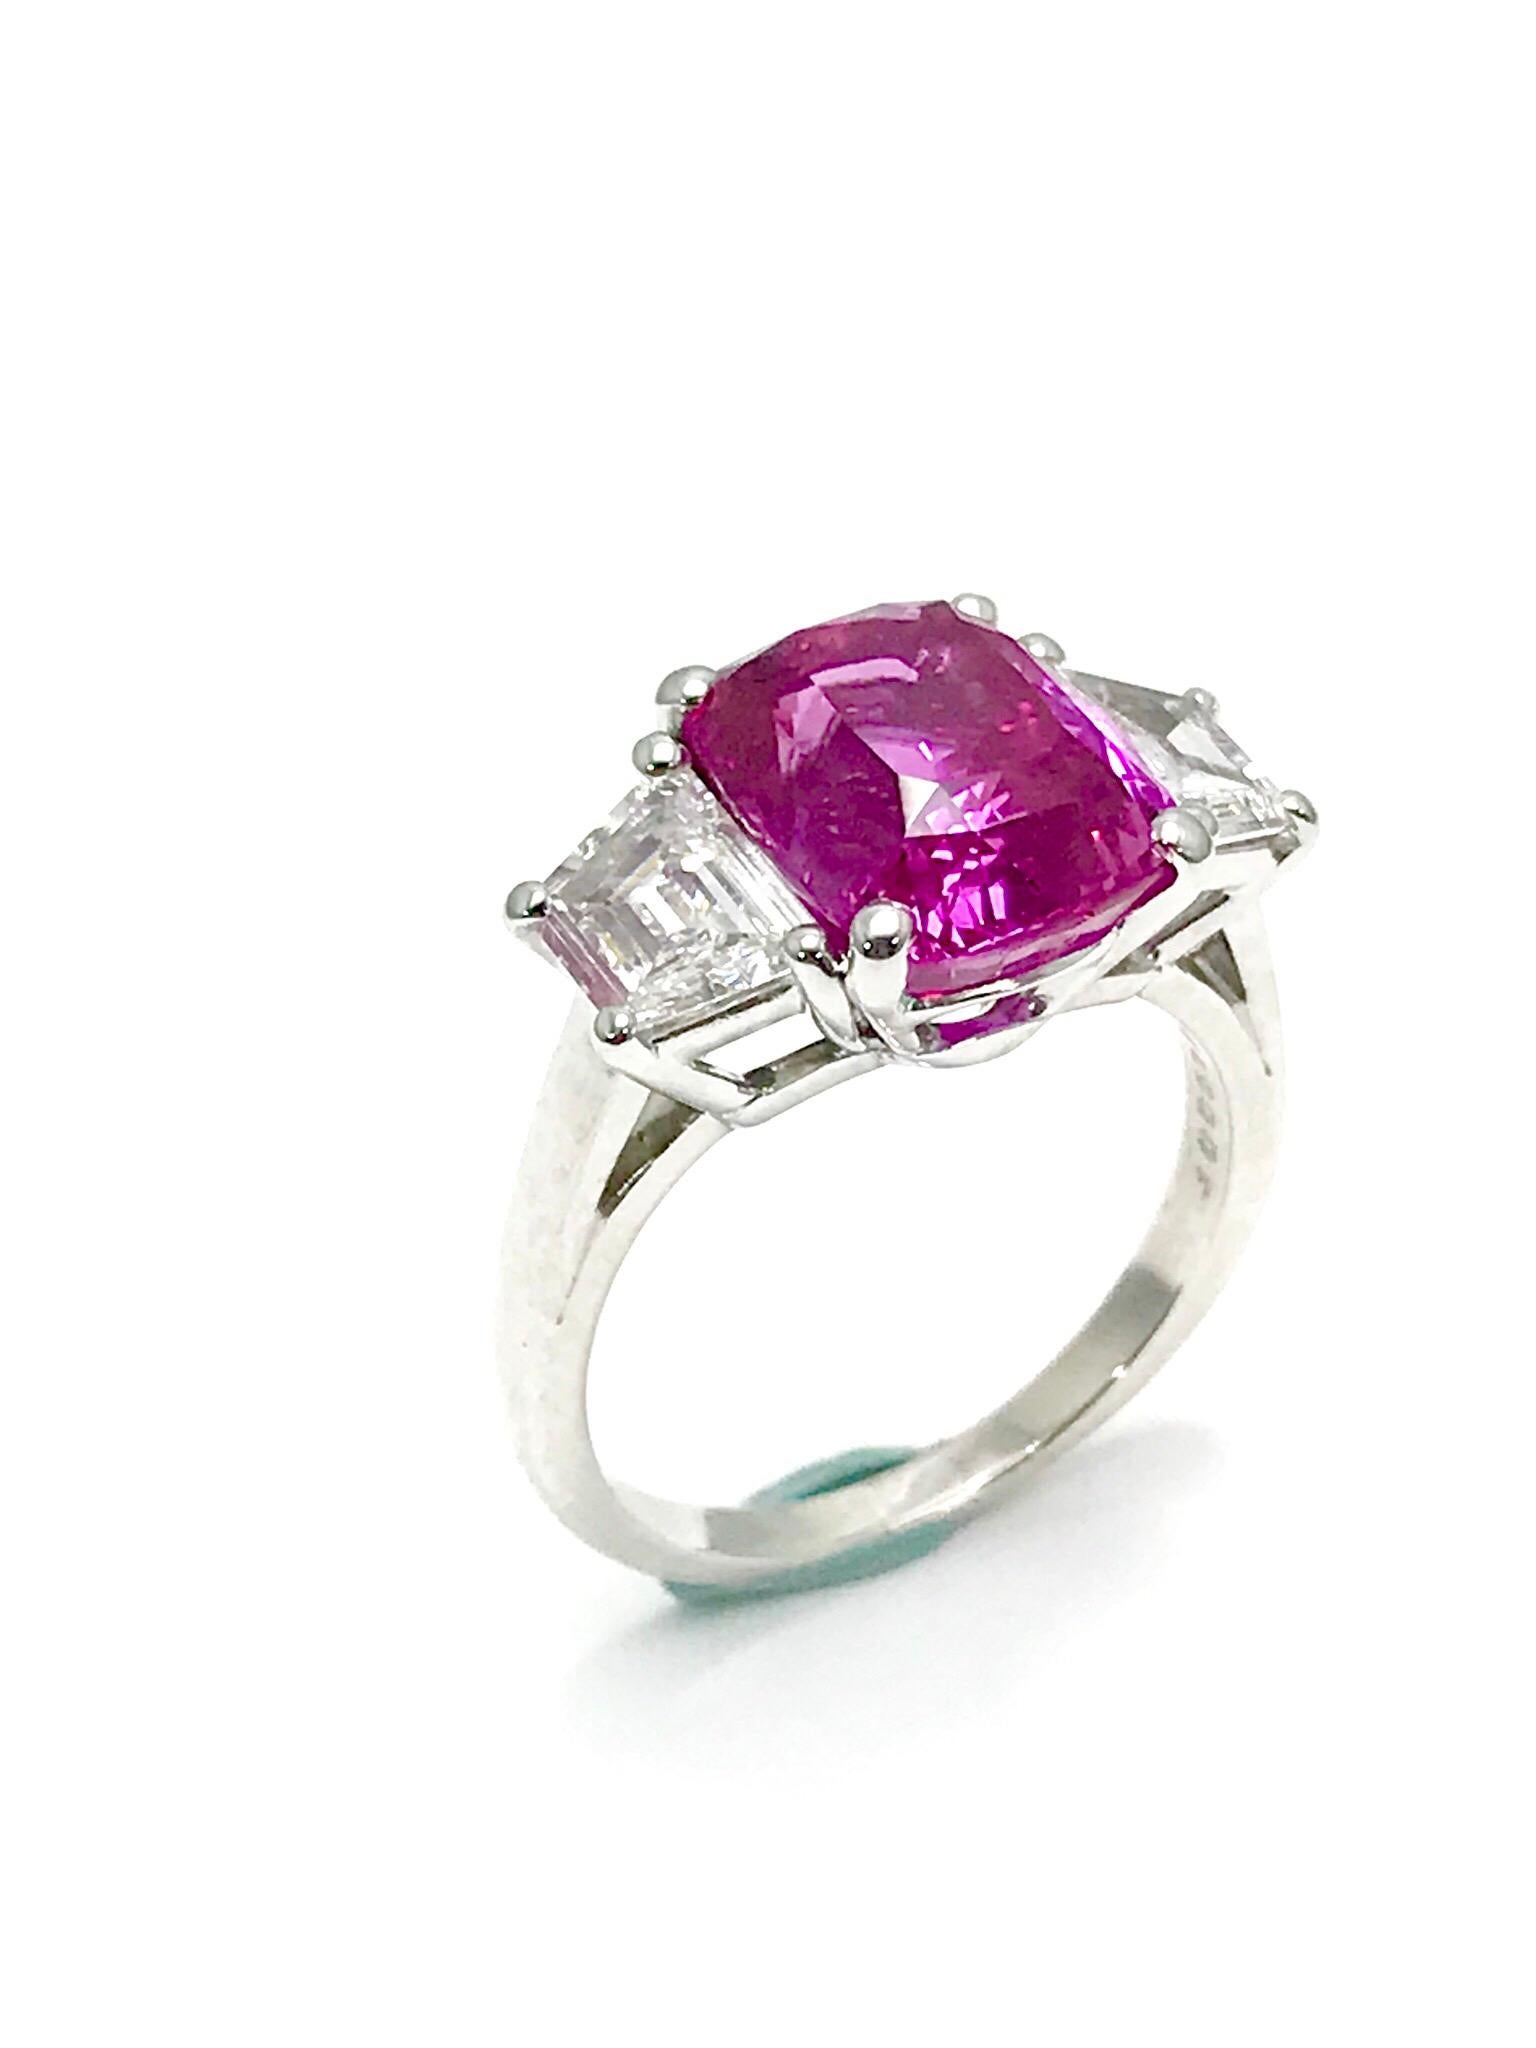 An absolutely stunning Oscar Heyman 6.32 carat Pink Sapphire and trapezoid cut Diamond platinum ring.  The Pink Sapphire displays breathtaking color, set in a four prong basket setting with two trapezoid cut Diamonds on either side.  The Diamonds